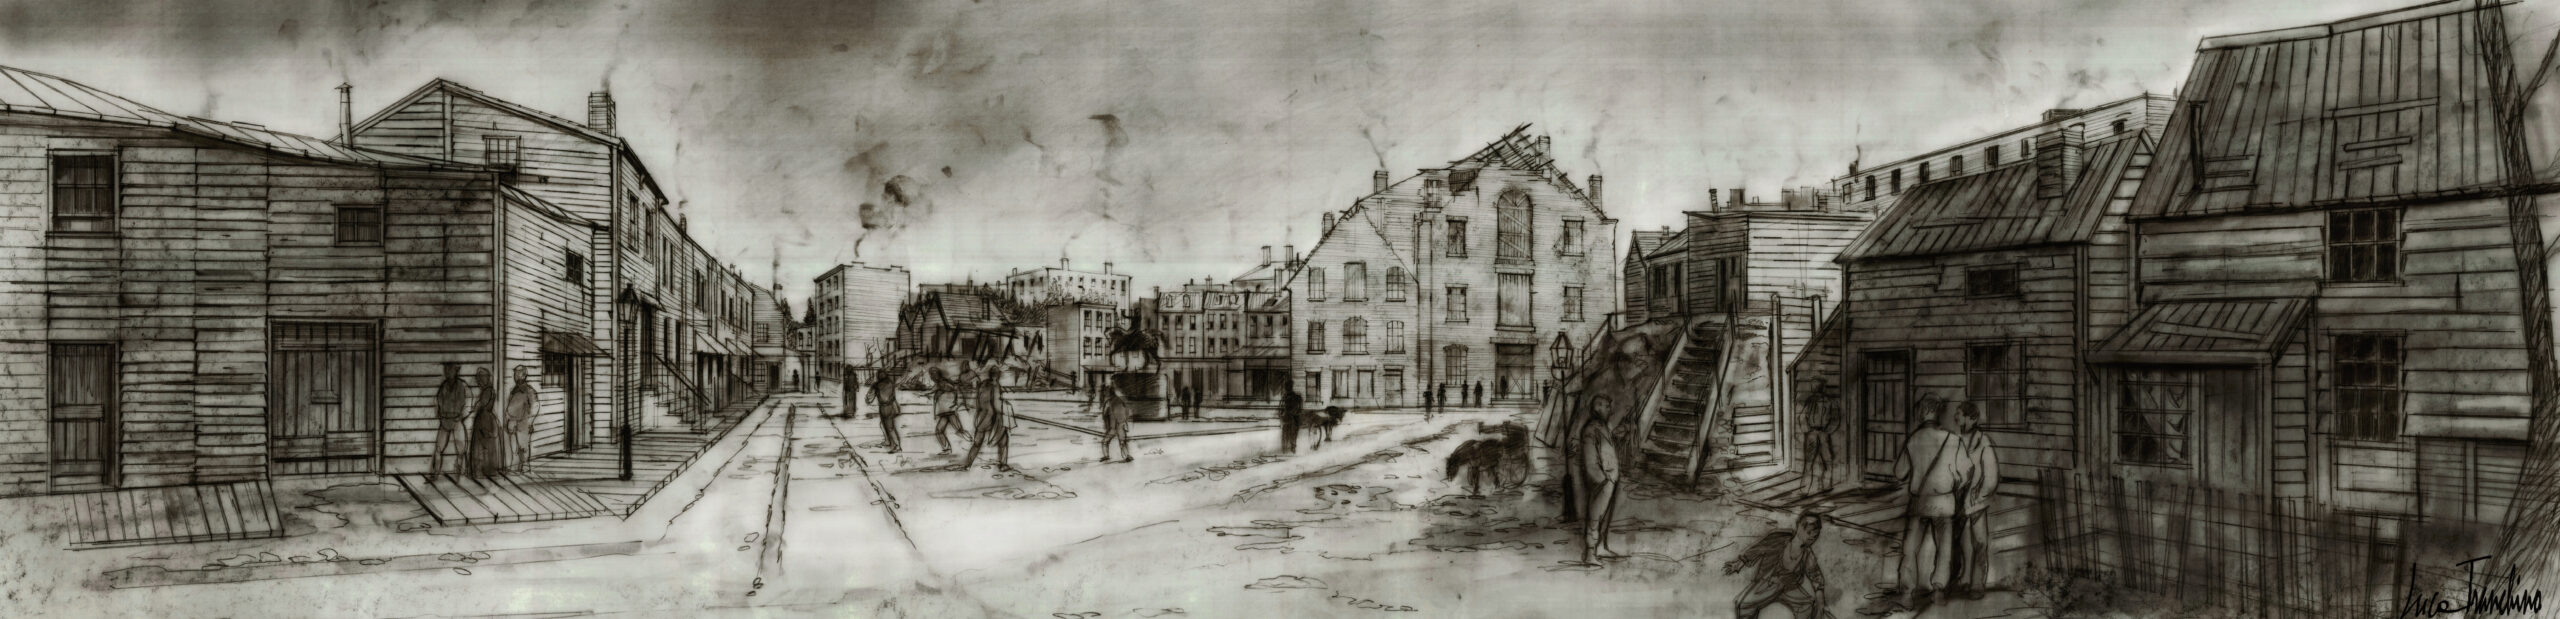 Gangs of New York - Directed by Martin Scorsese - Five Points Square - Design Sketch by Luca Tranchino - ©2002 - Miramax Films